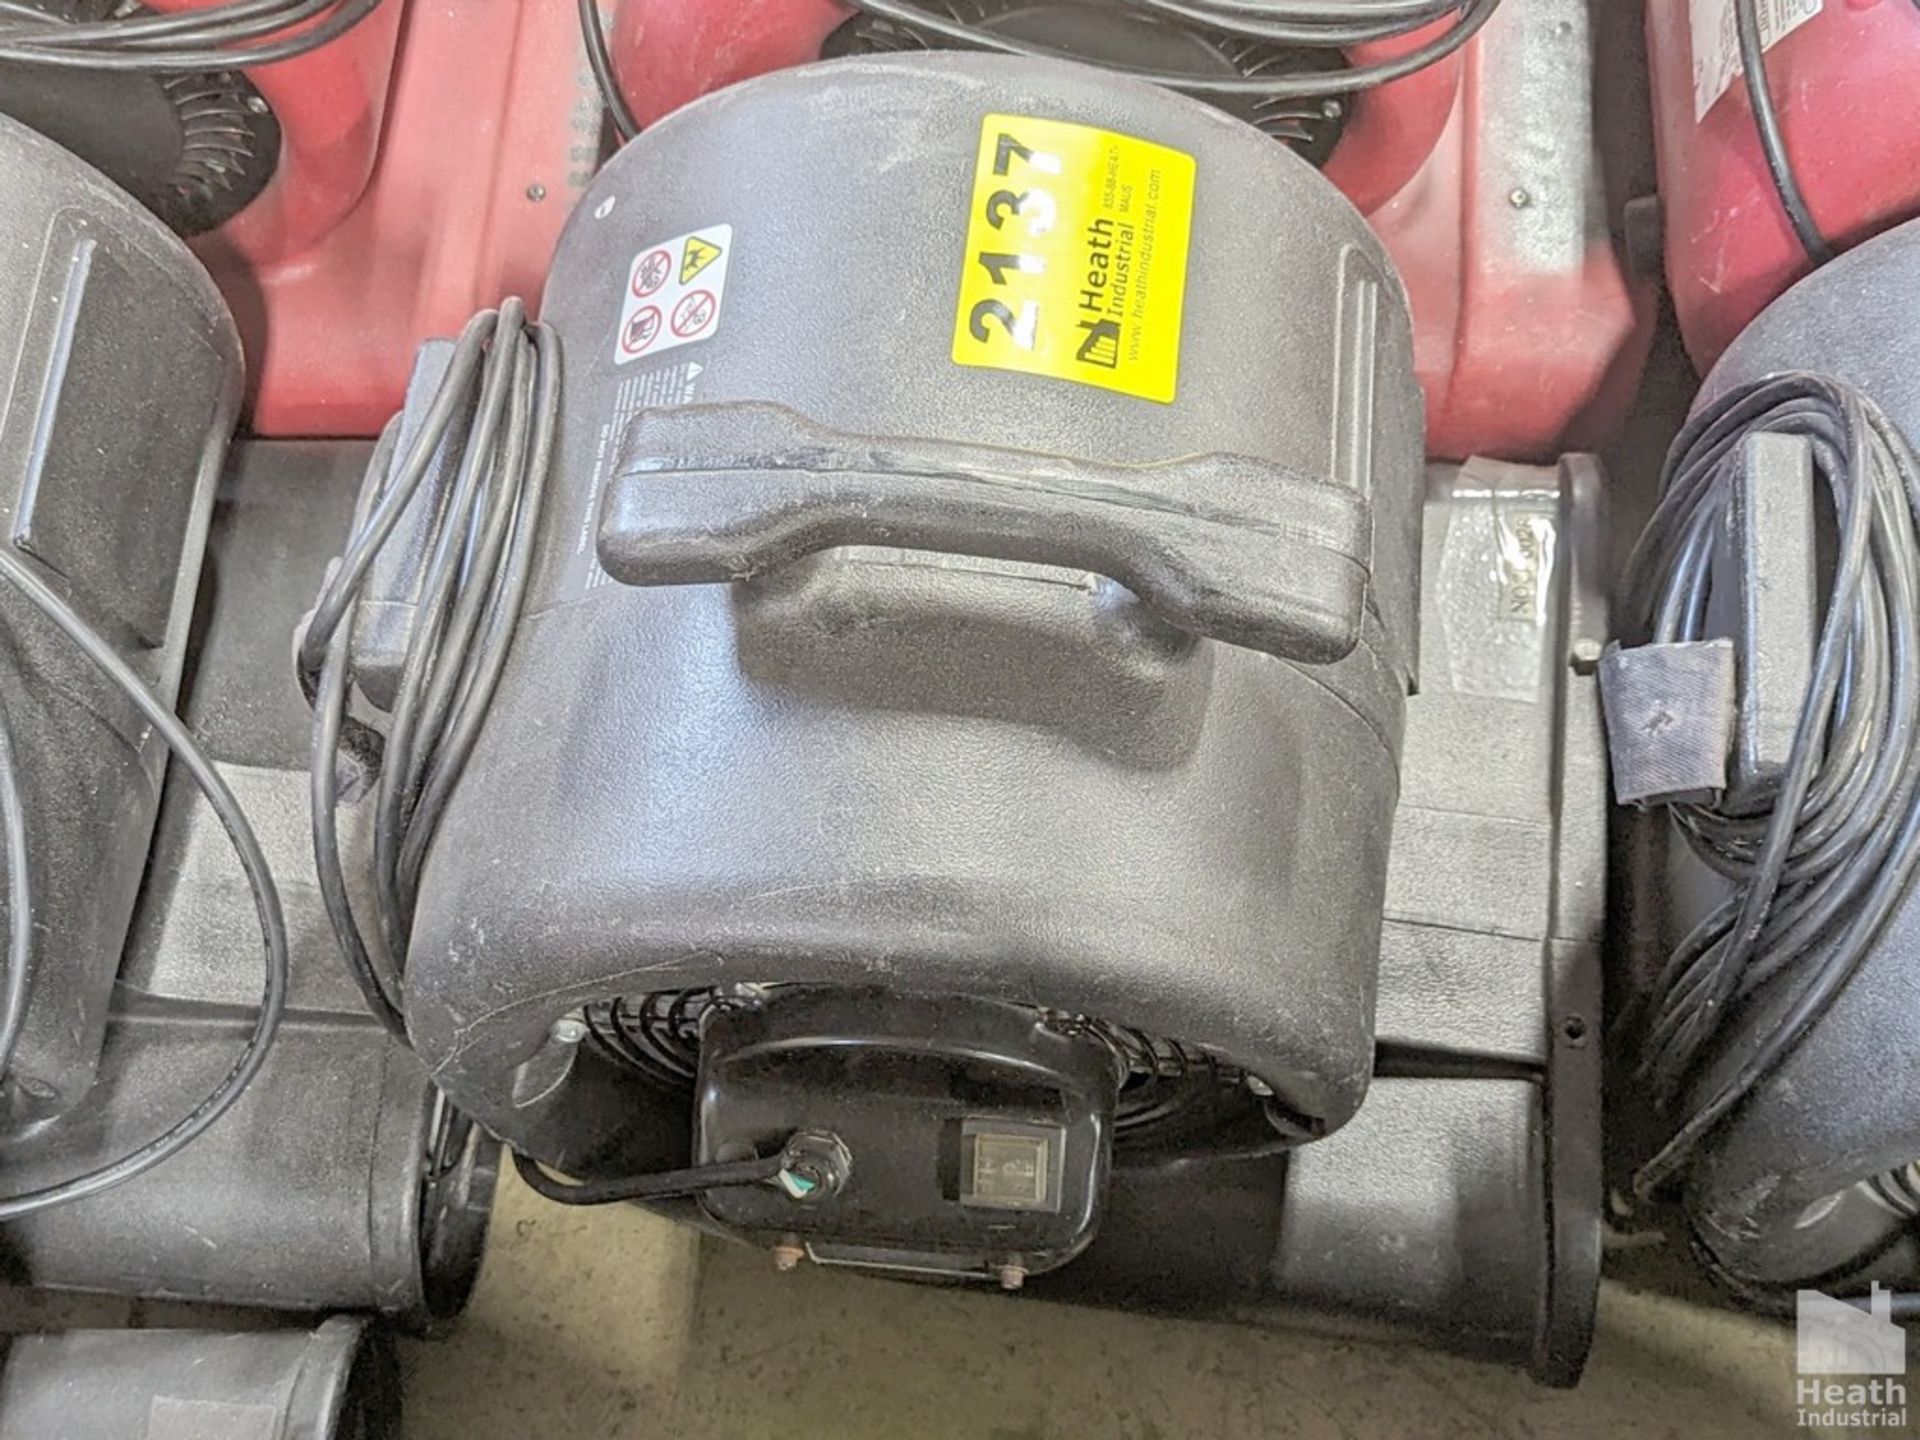 MYTEE MODEL 2200 AIR MOVER